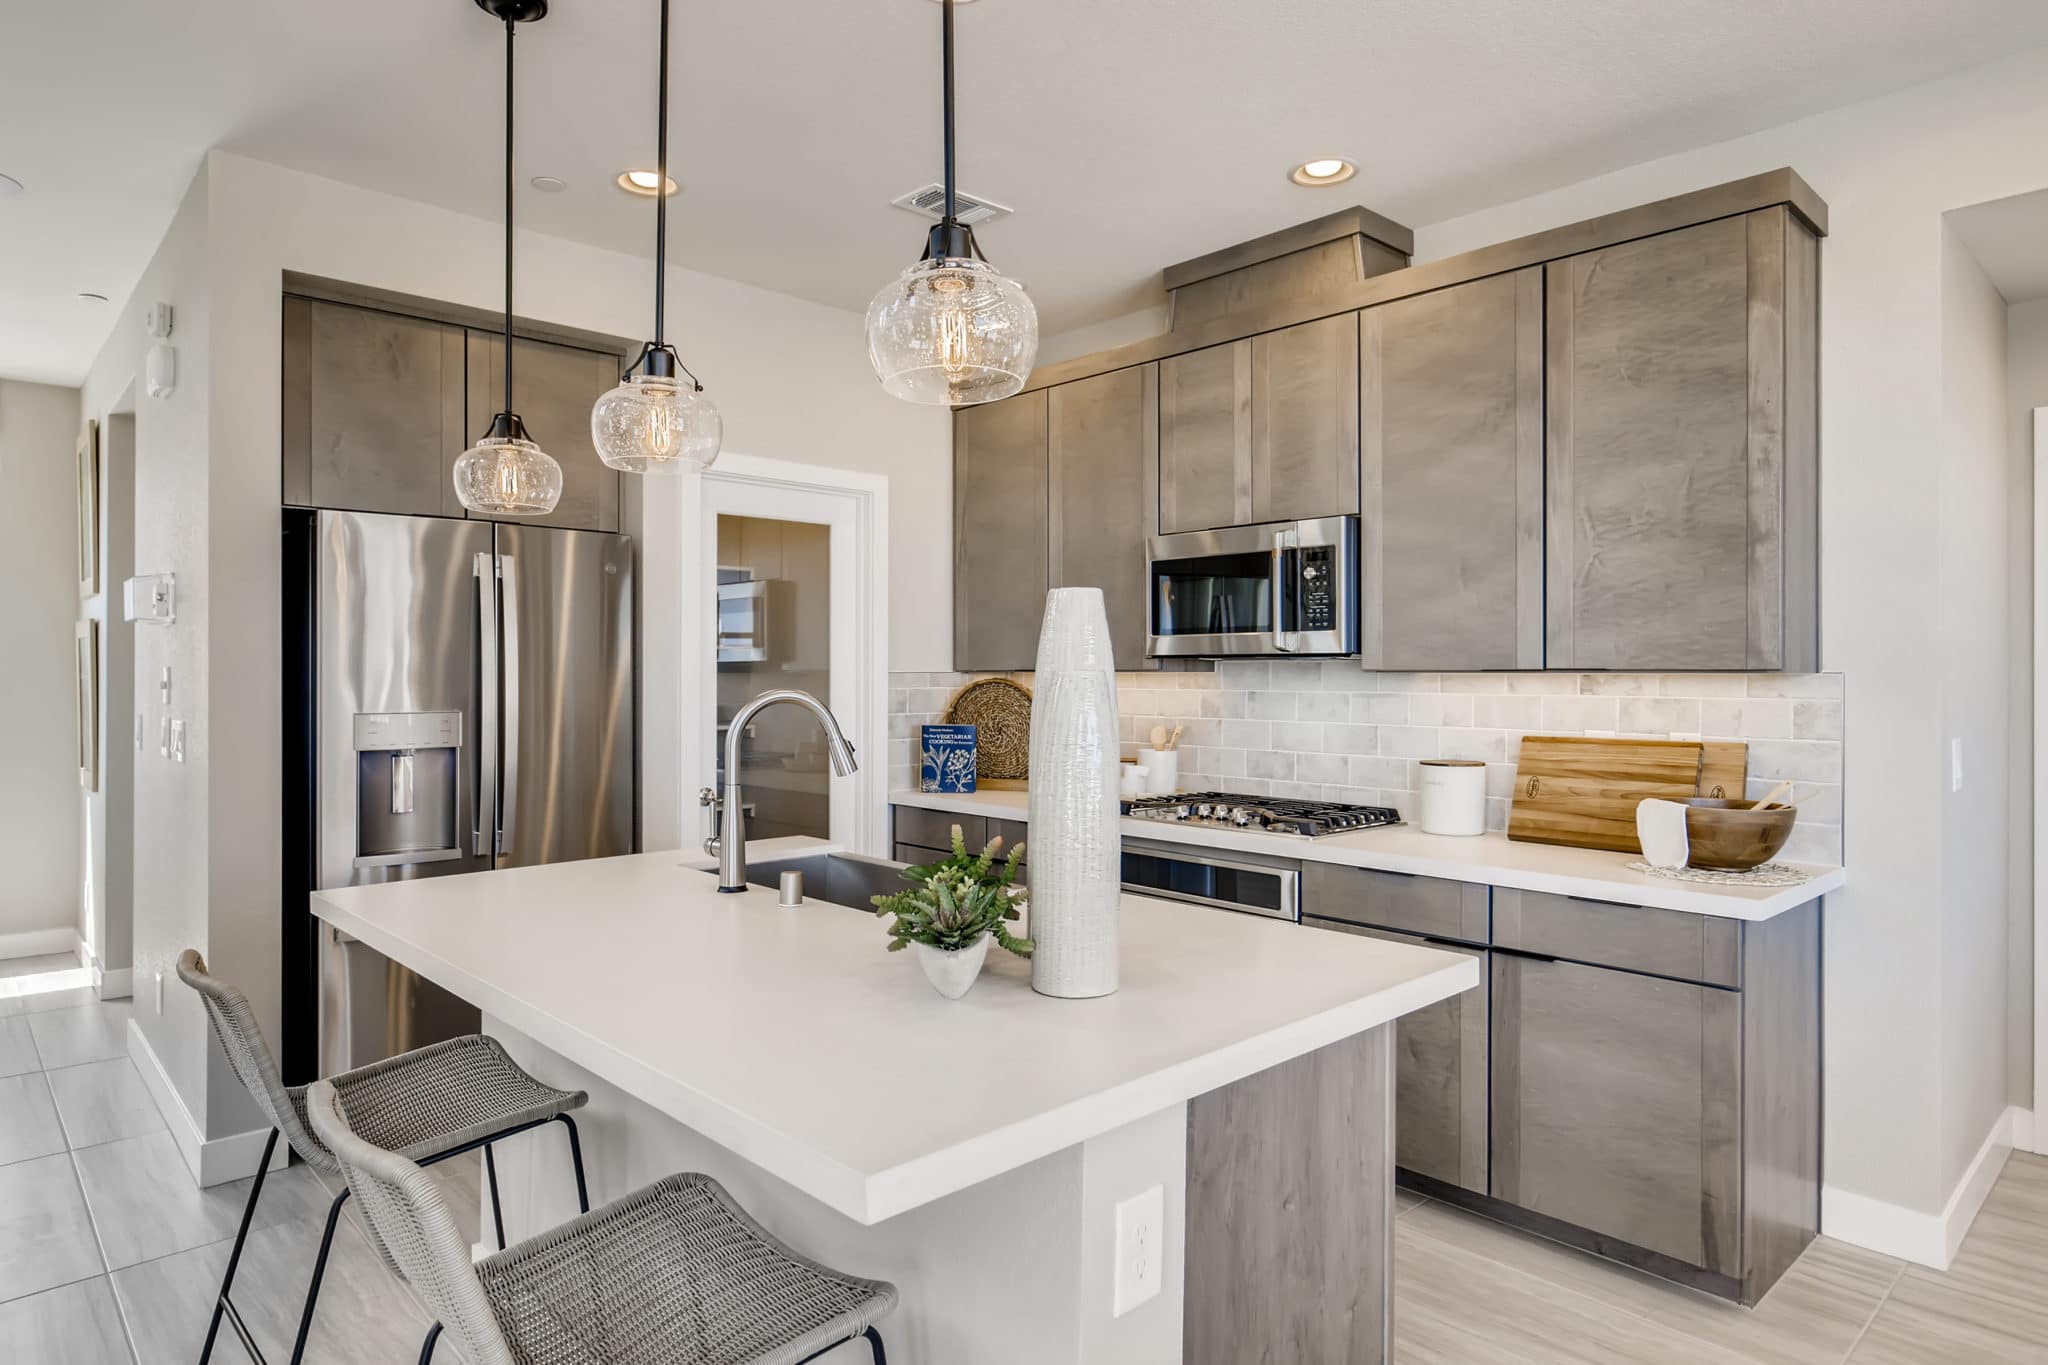 Kitchen of Amber Plan 3 at Obsidian by Woodside